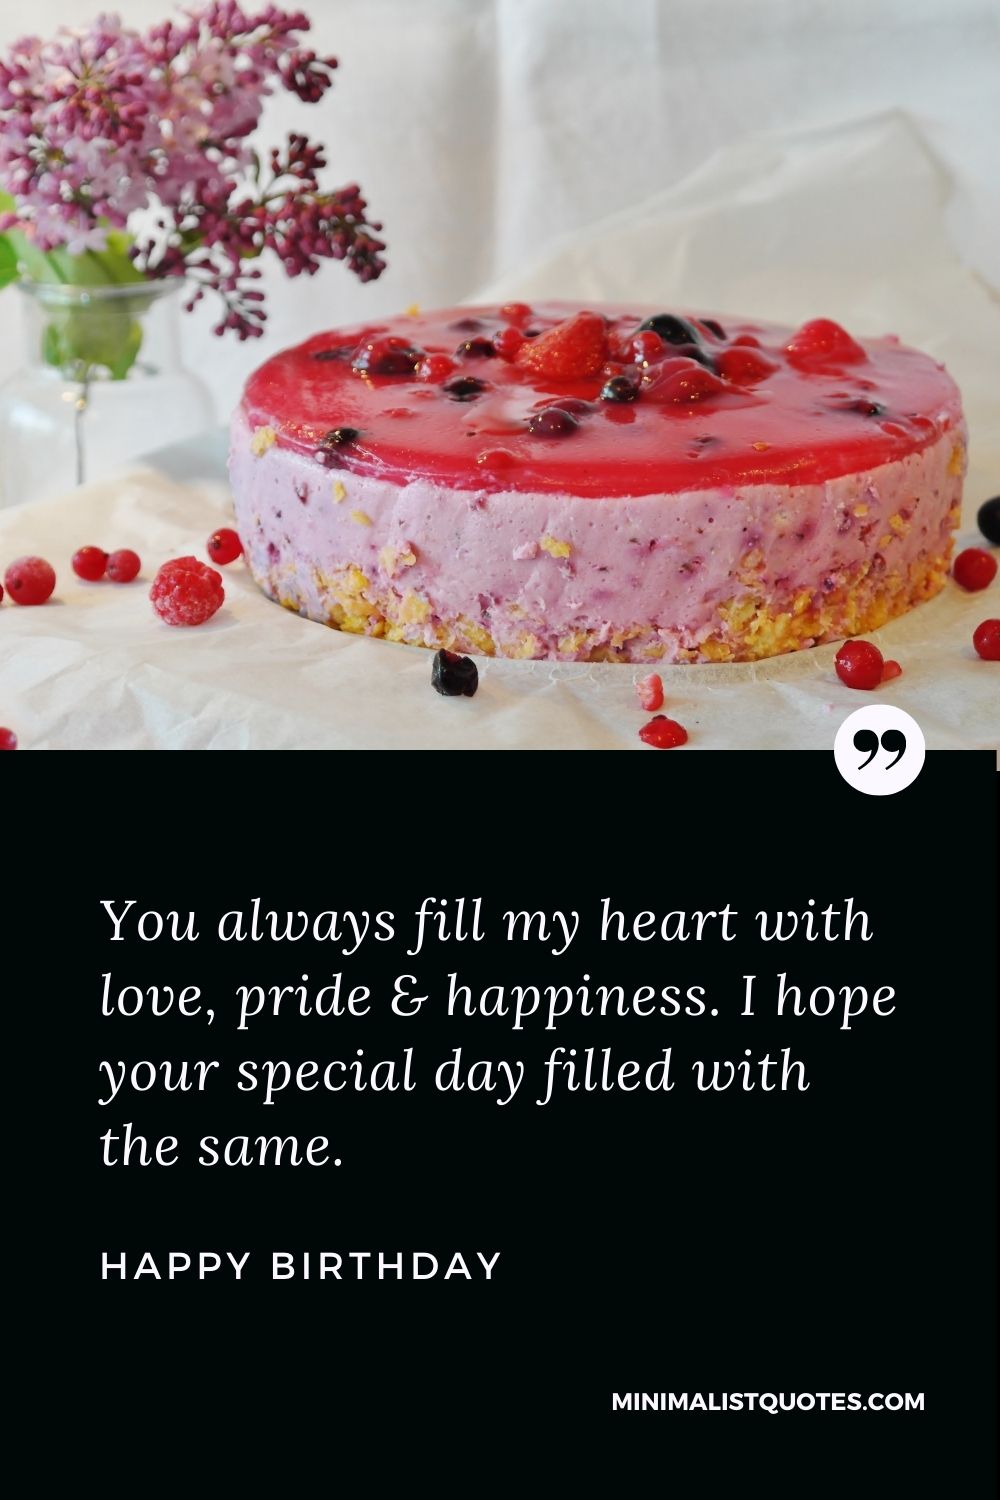 Happy birthday message with love and pride